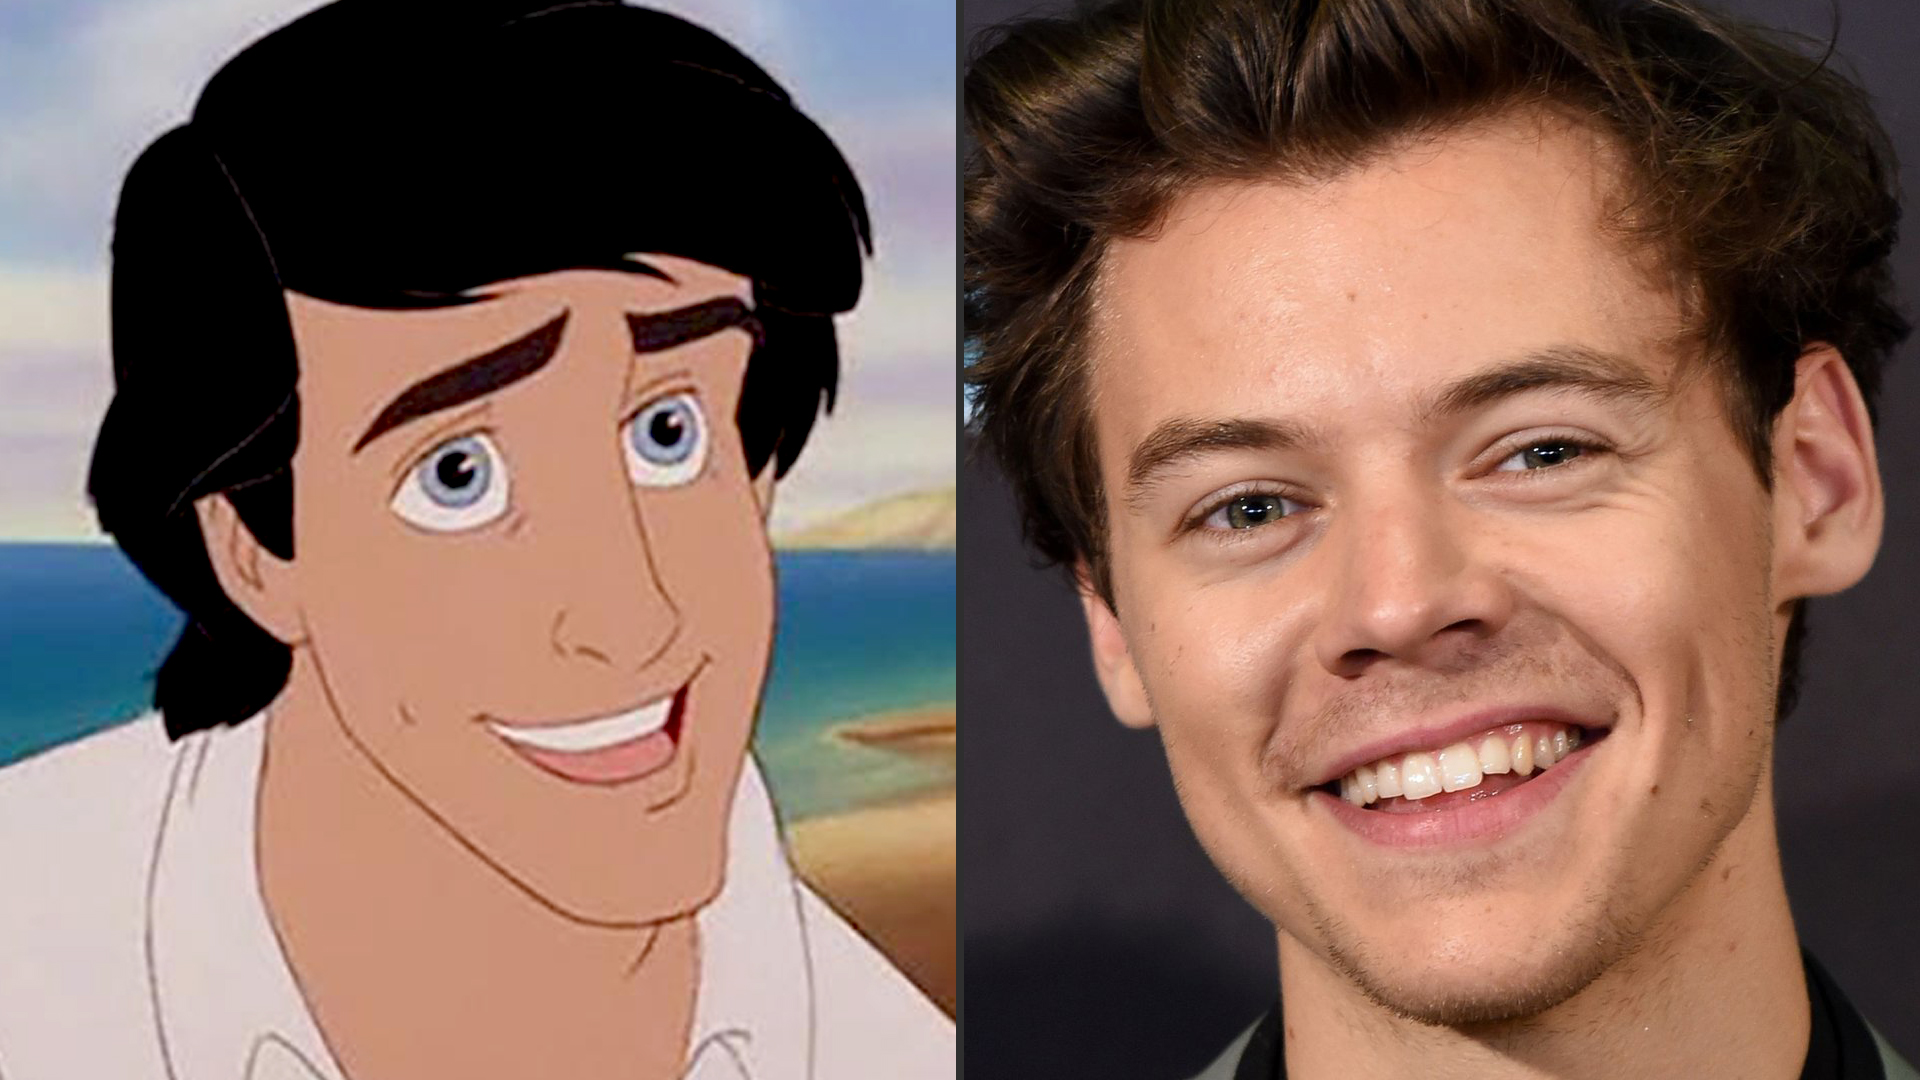 Harry Styles turns down the part of Prince Eric in Disney's